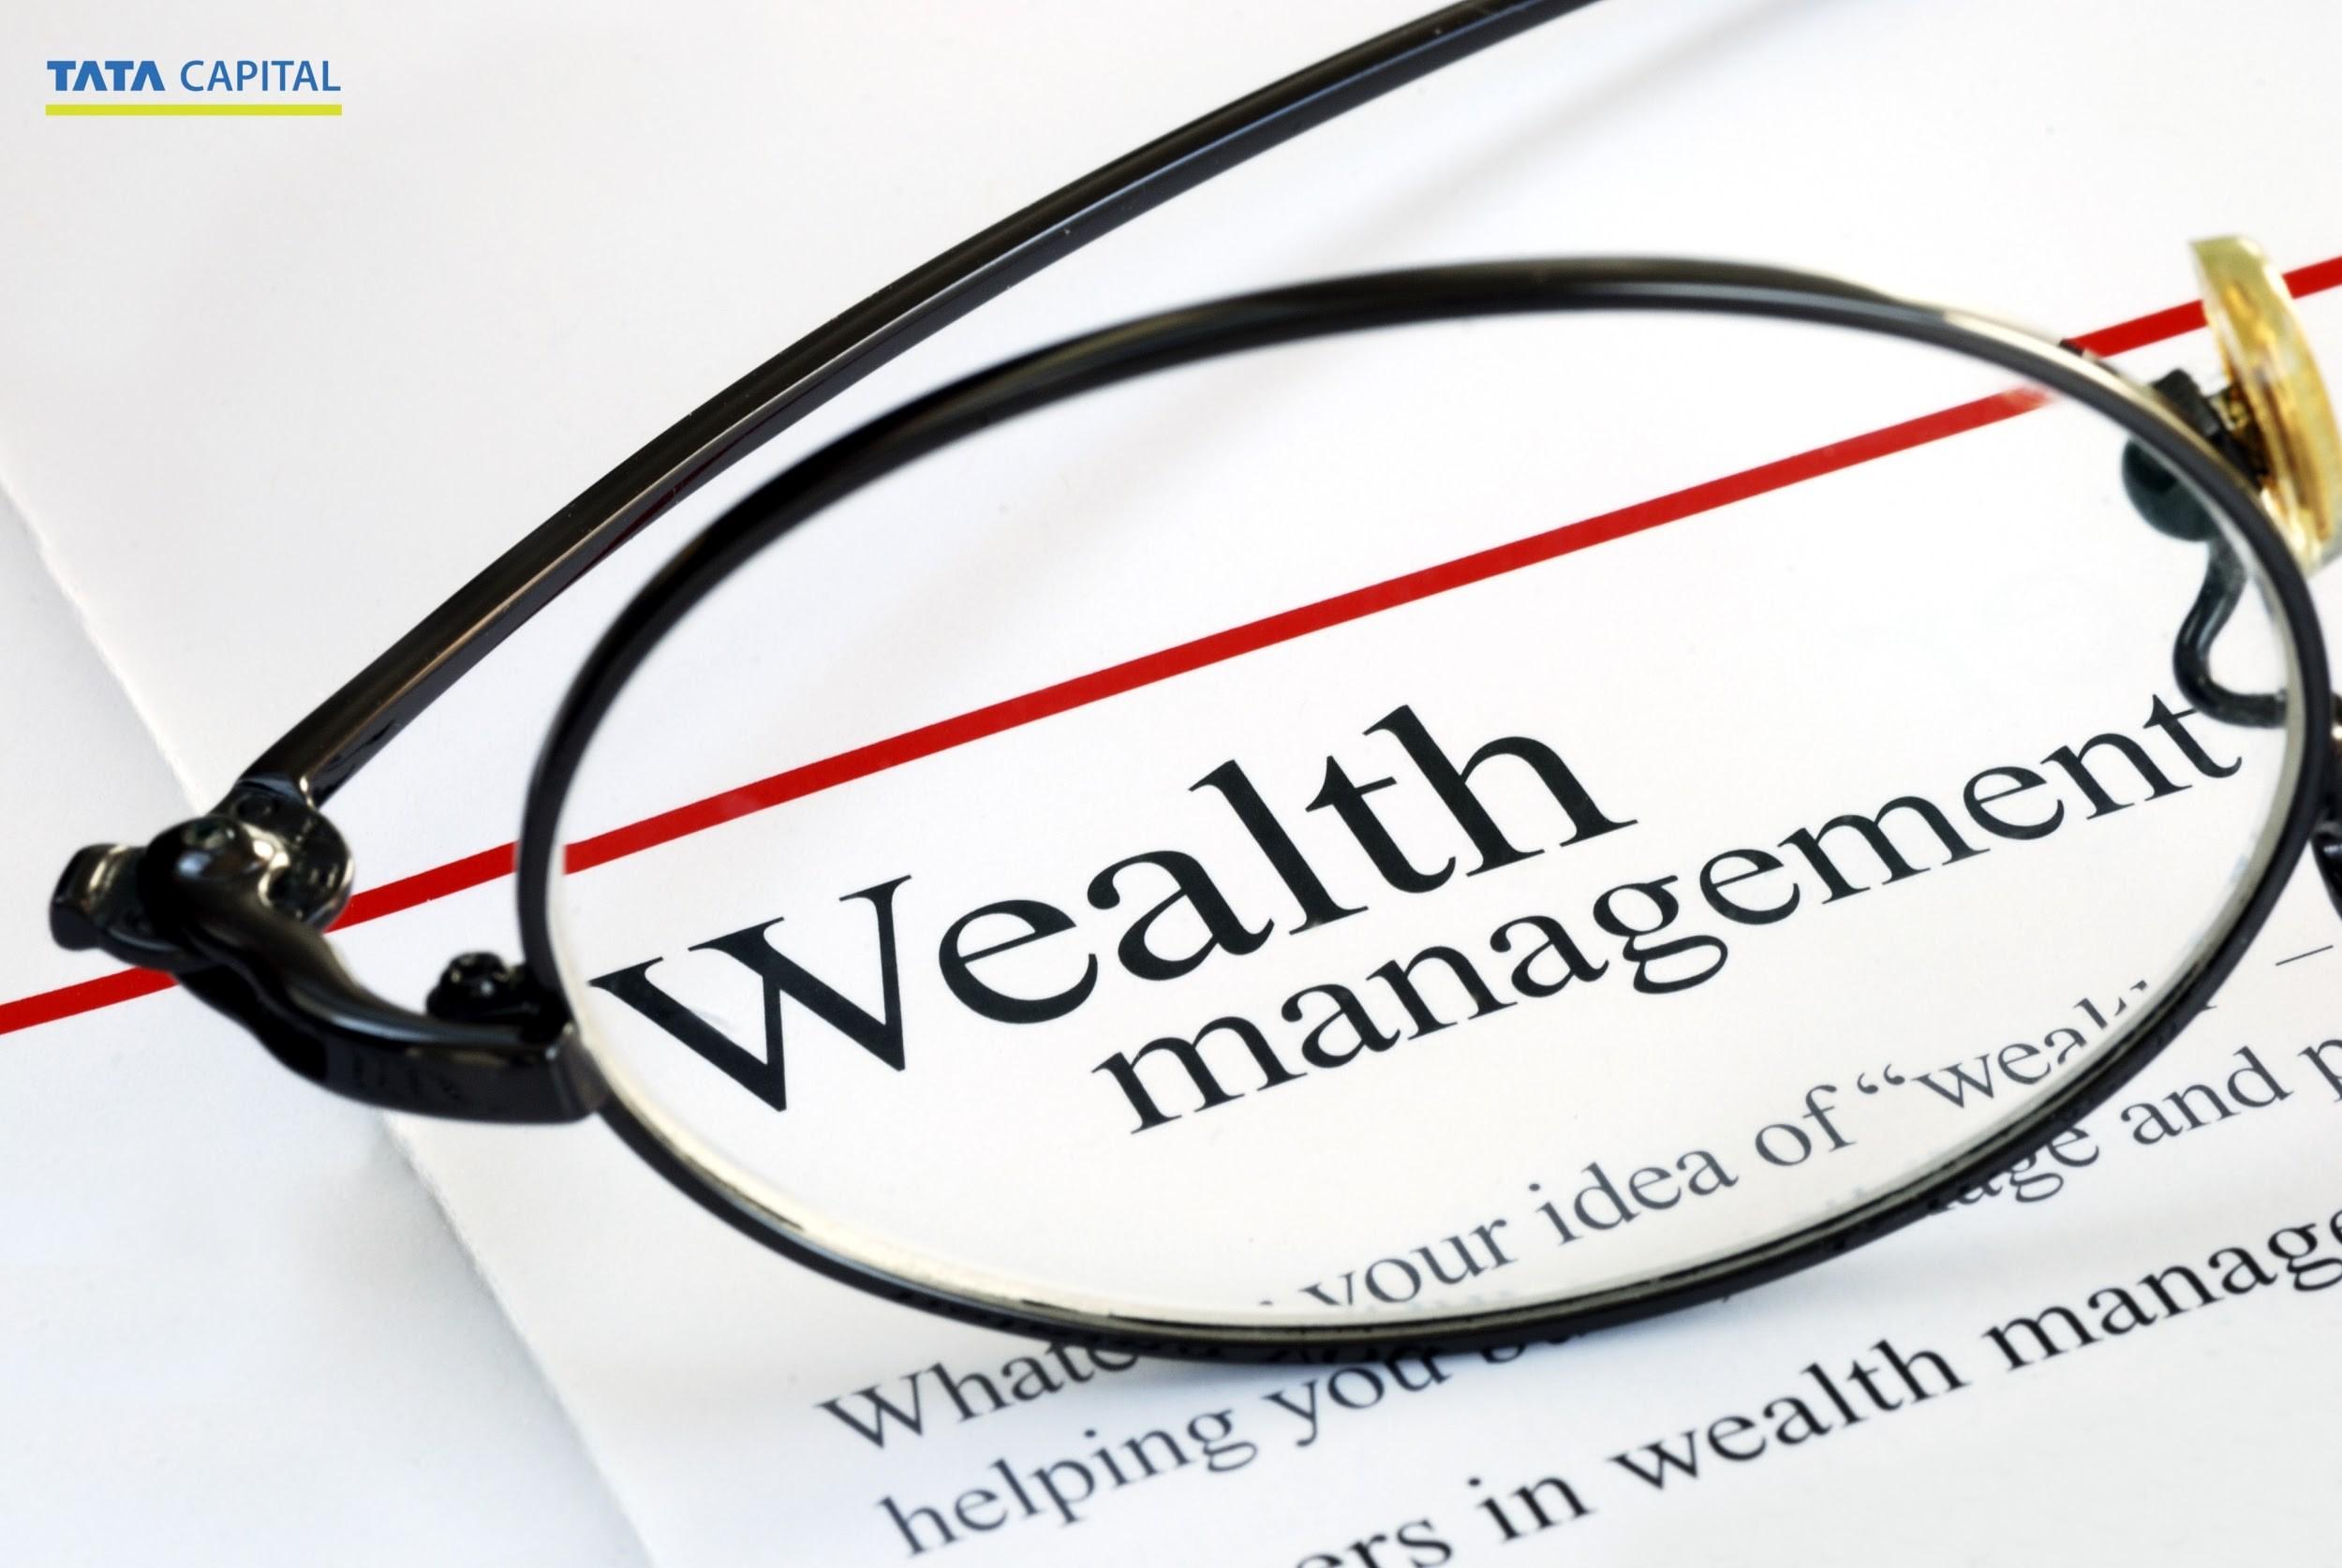 What do all first-rate wealth managers have in common?